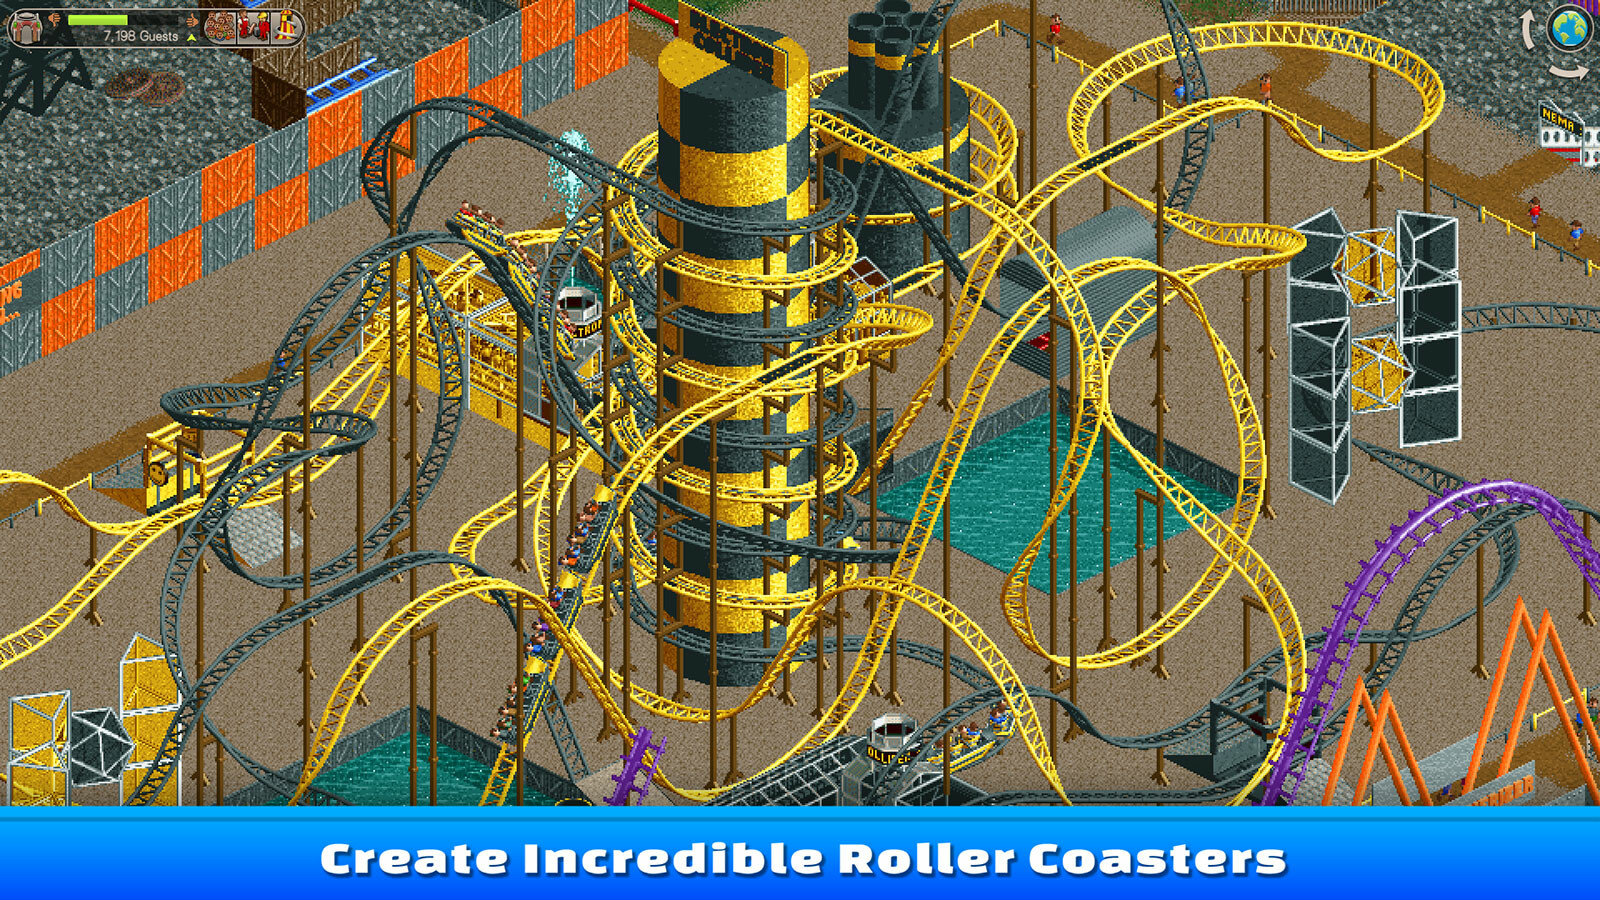 Rollercoaster tycoon classic mac torrent